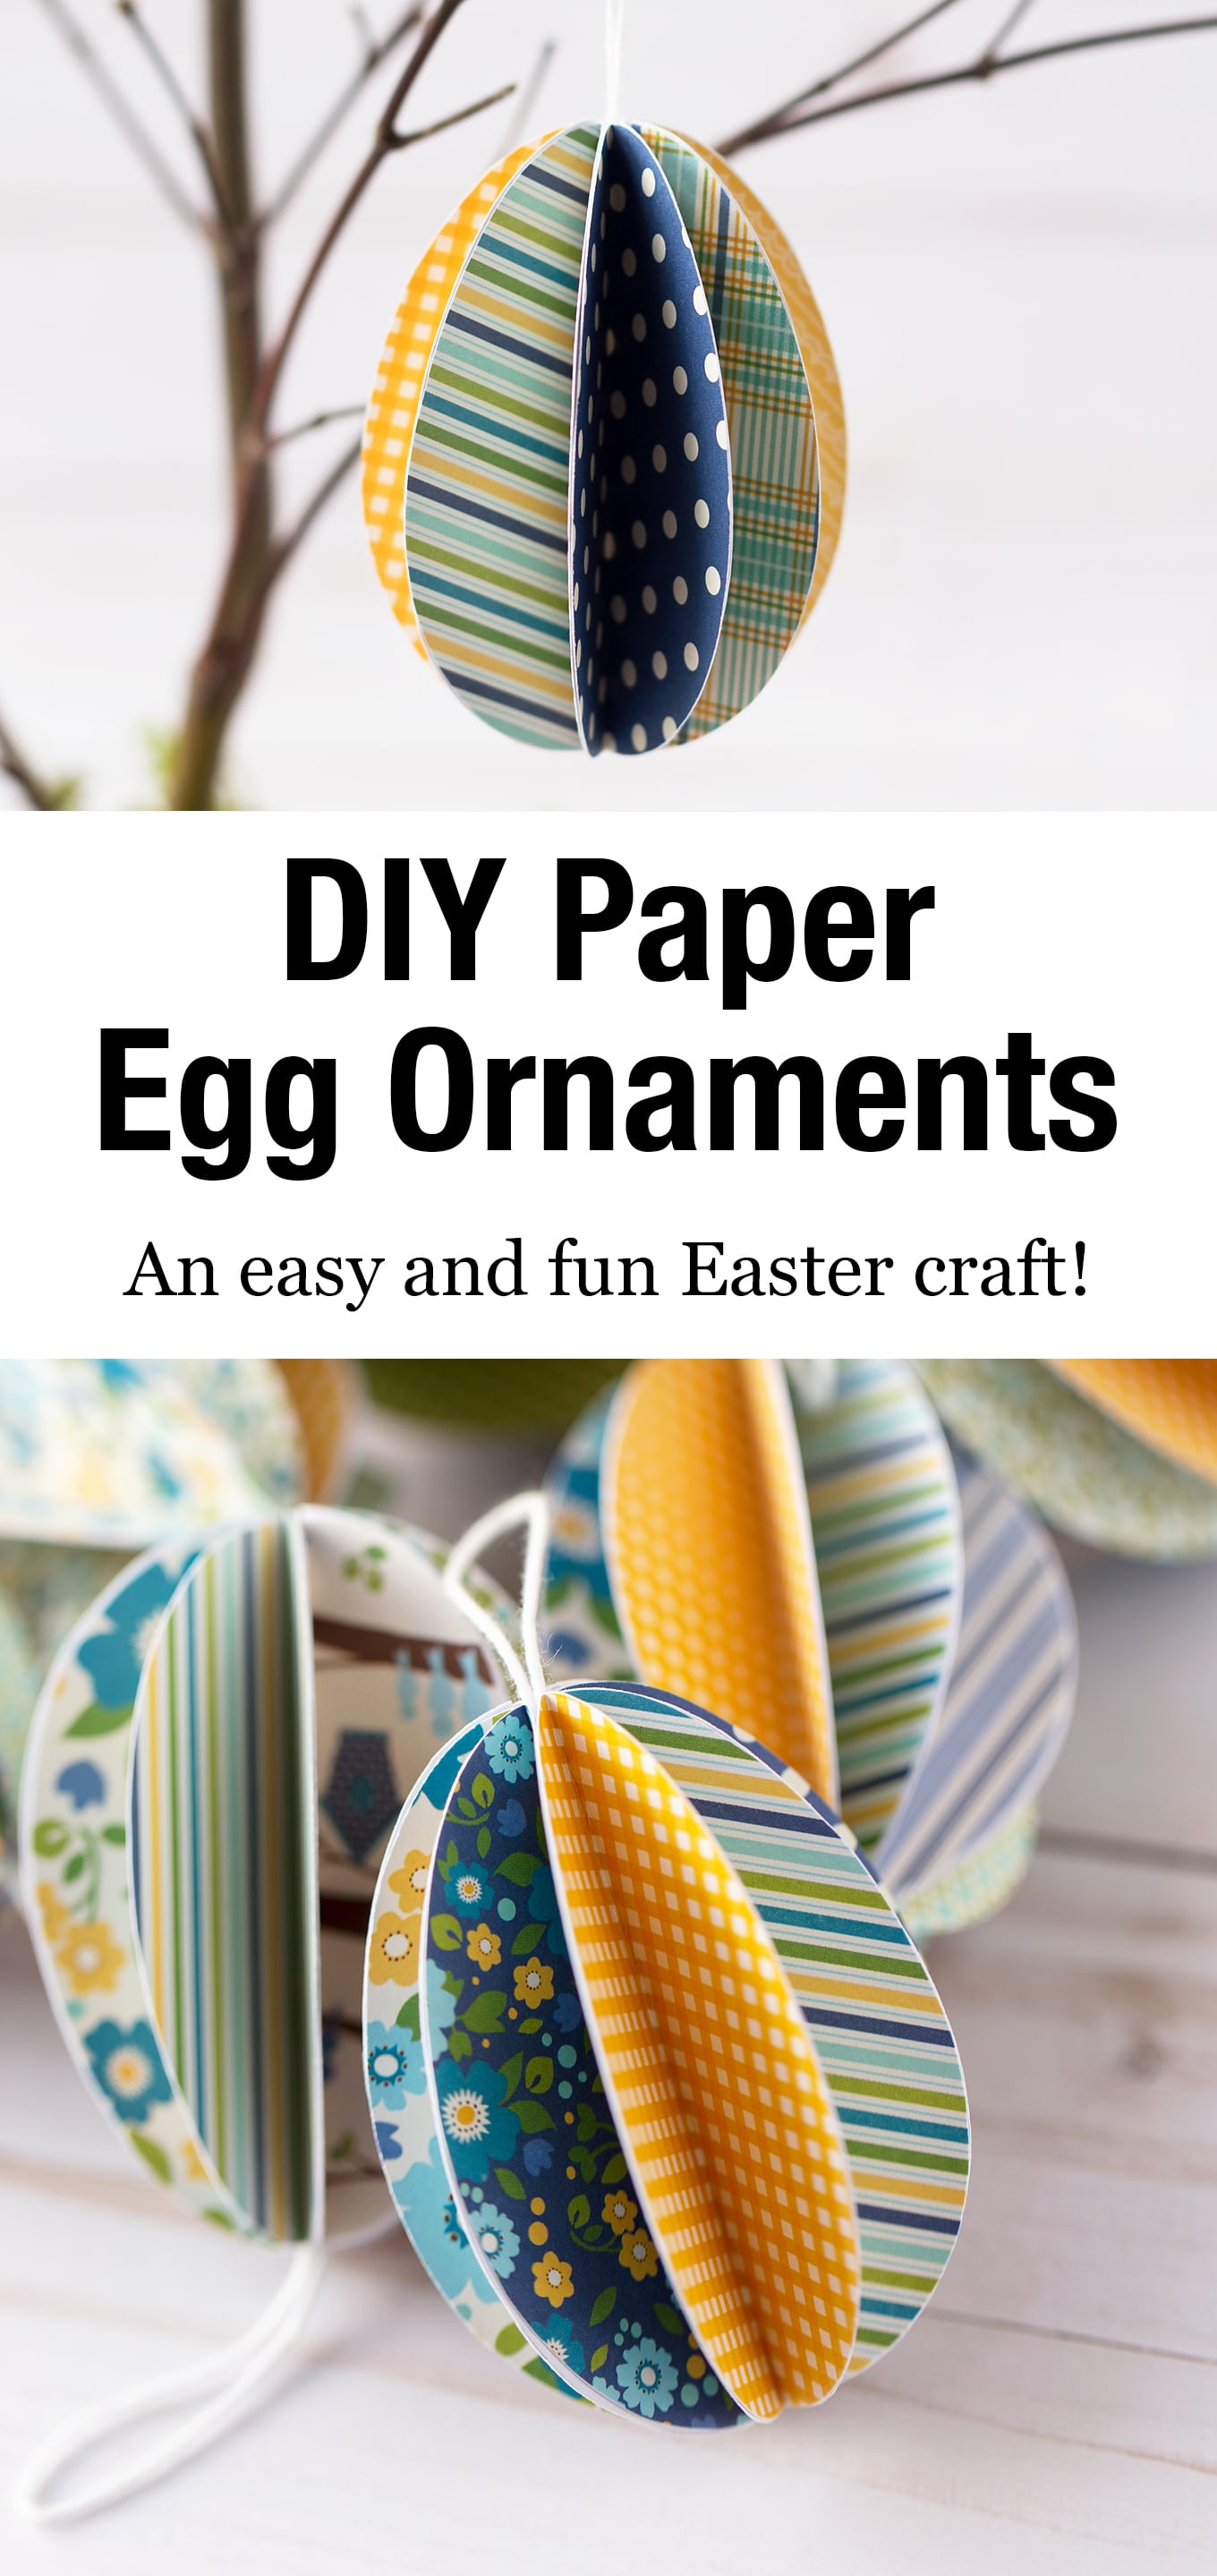 Use the free printable template to make beautiful 3D Paper Easter Egg Ornaments! It's the perfect Easter craft for kids of all ages! #eastereggornaments #papereggornaments #eastercraft #kidscrafts #3Dpapereggornaments via @firefliesandmudpies